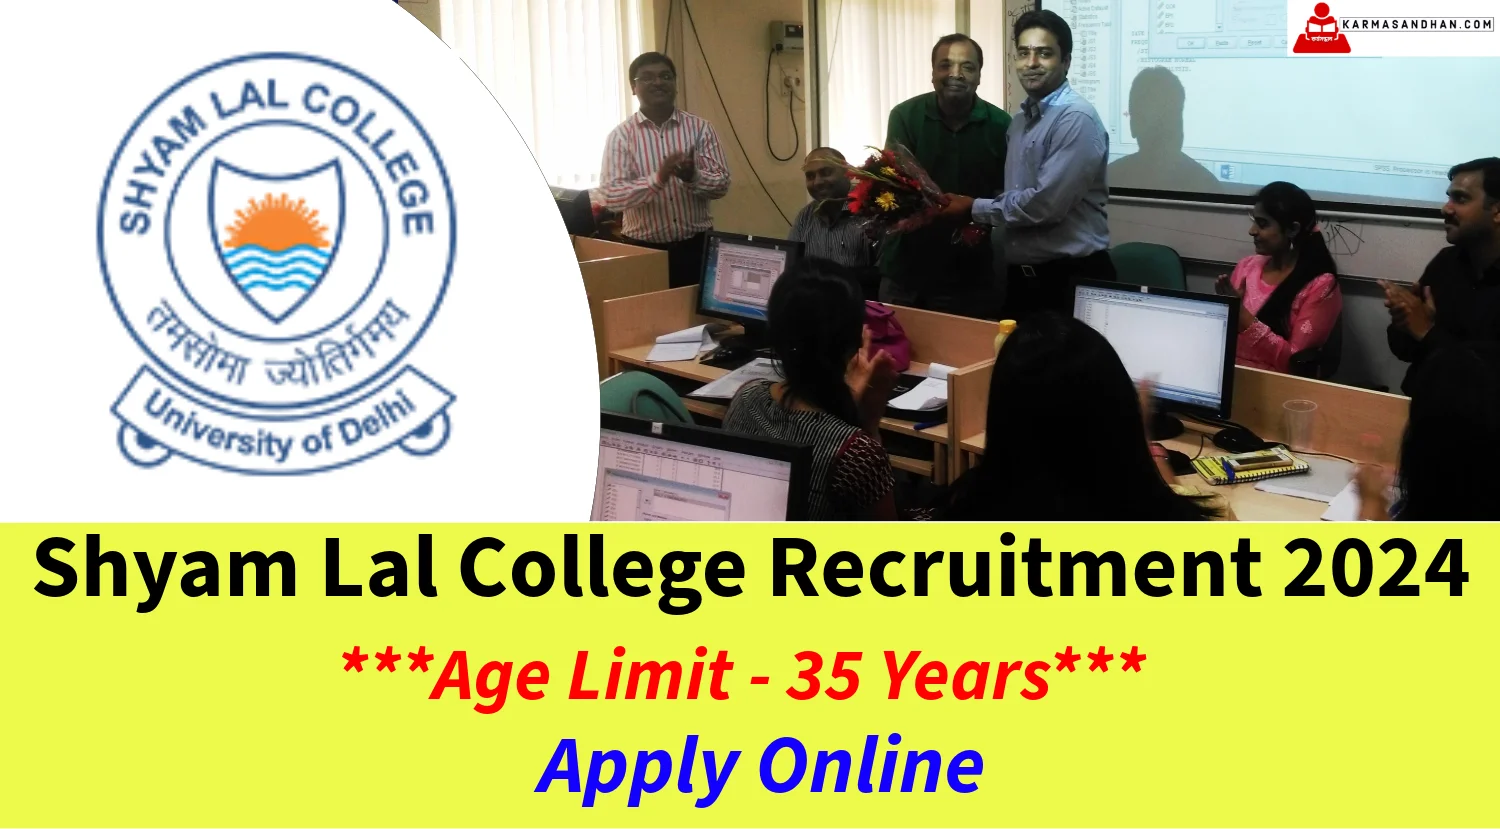 Shyam Lal College Recruitment 2024 for Non-Teaching Posts